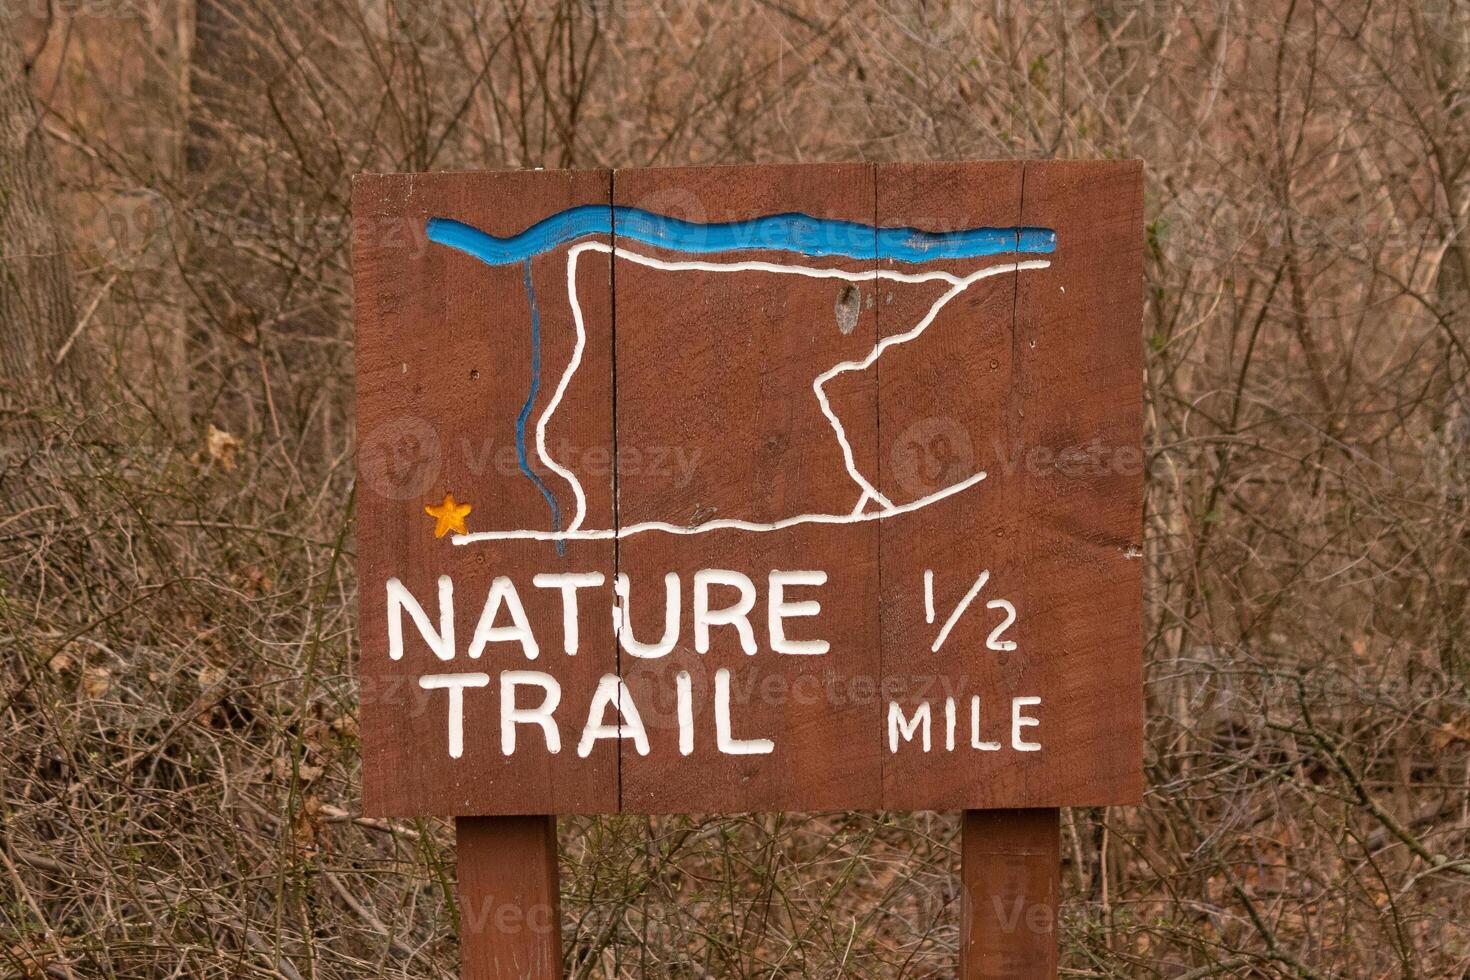 This sign in the woods marks the area of the trail. Helping to keep hikers from getting them lost and leading the way. The brown paint looks worn and chipping. The white letters standing out. photo